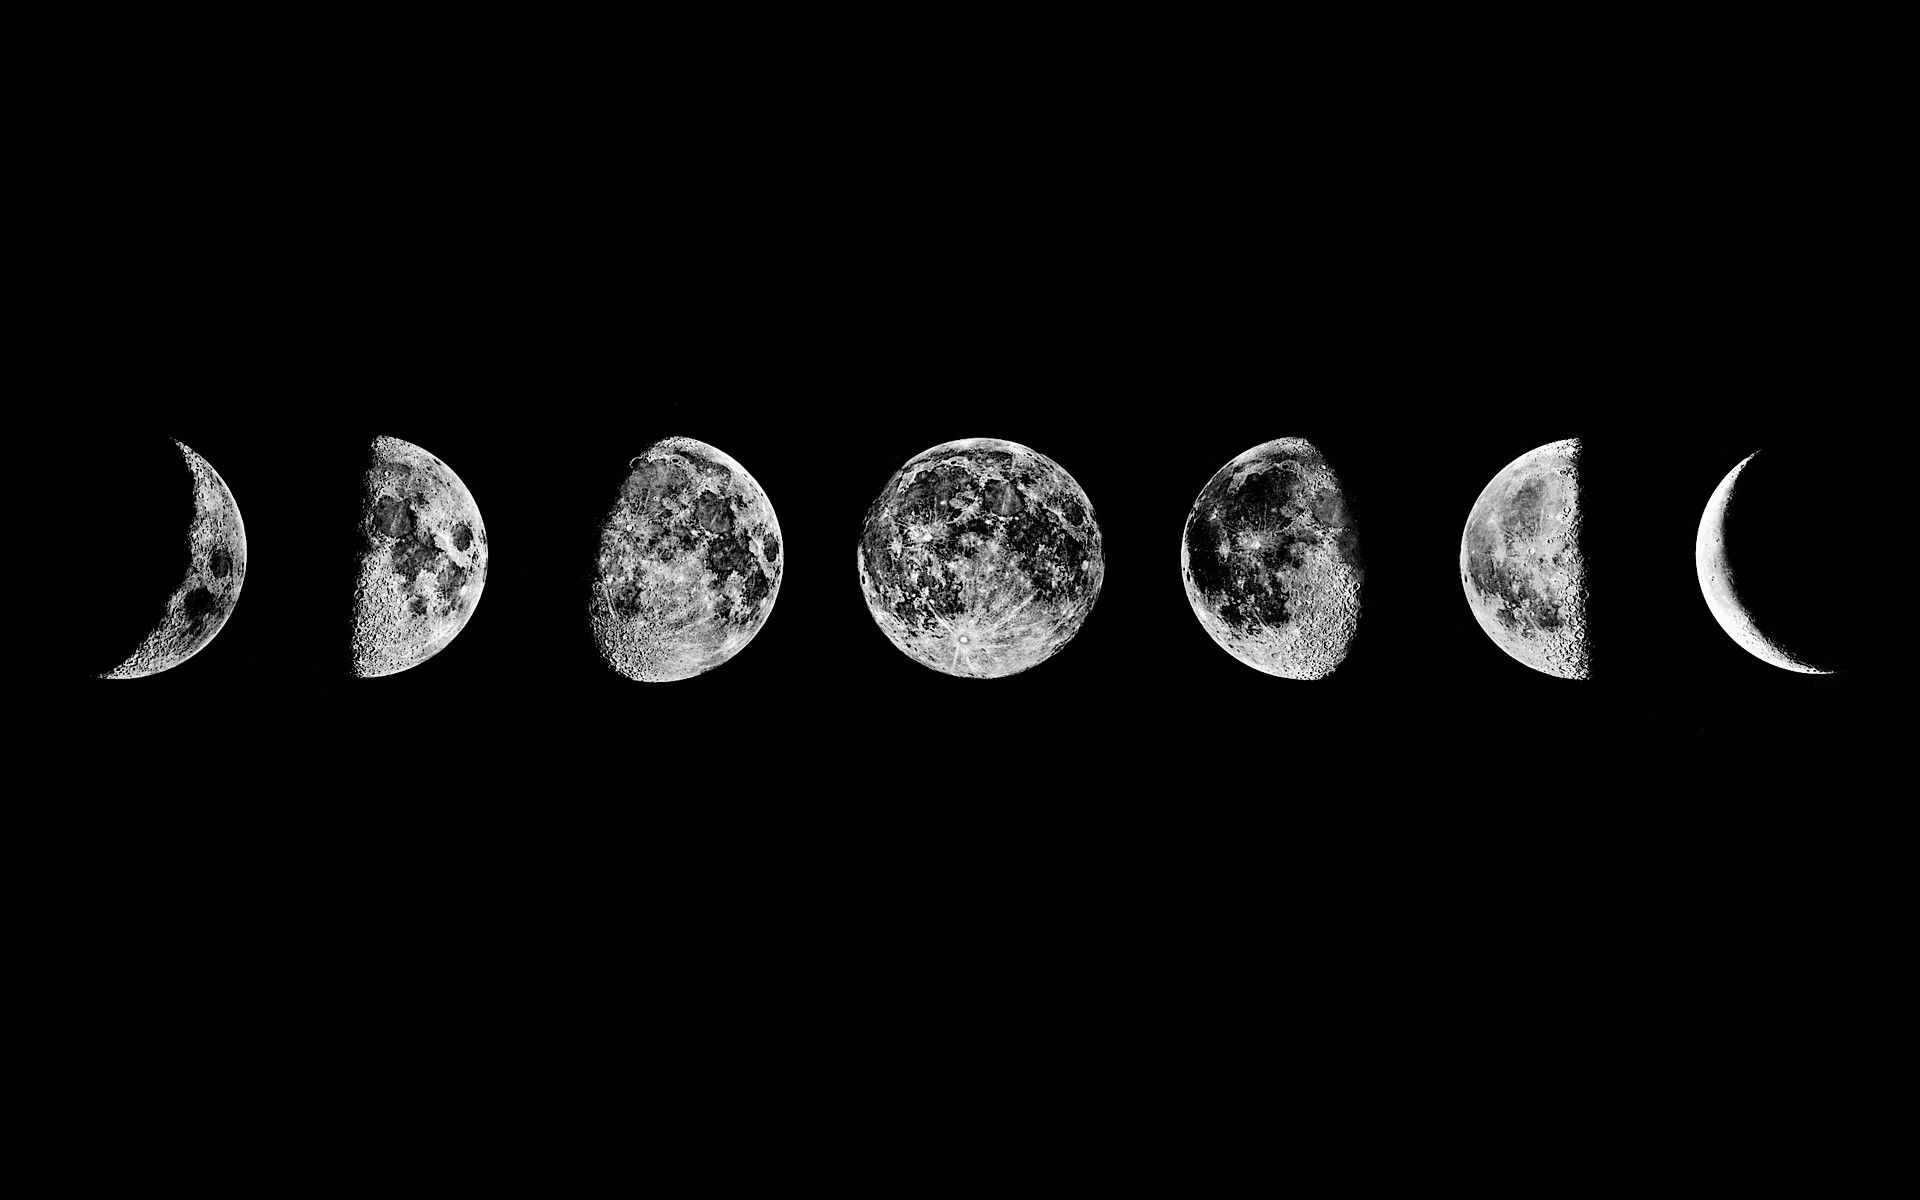 Moon phases on black background. Elements of this image furnished by NASA - Chromebook